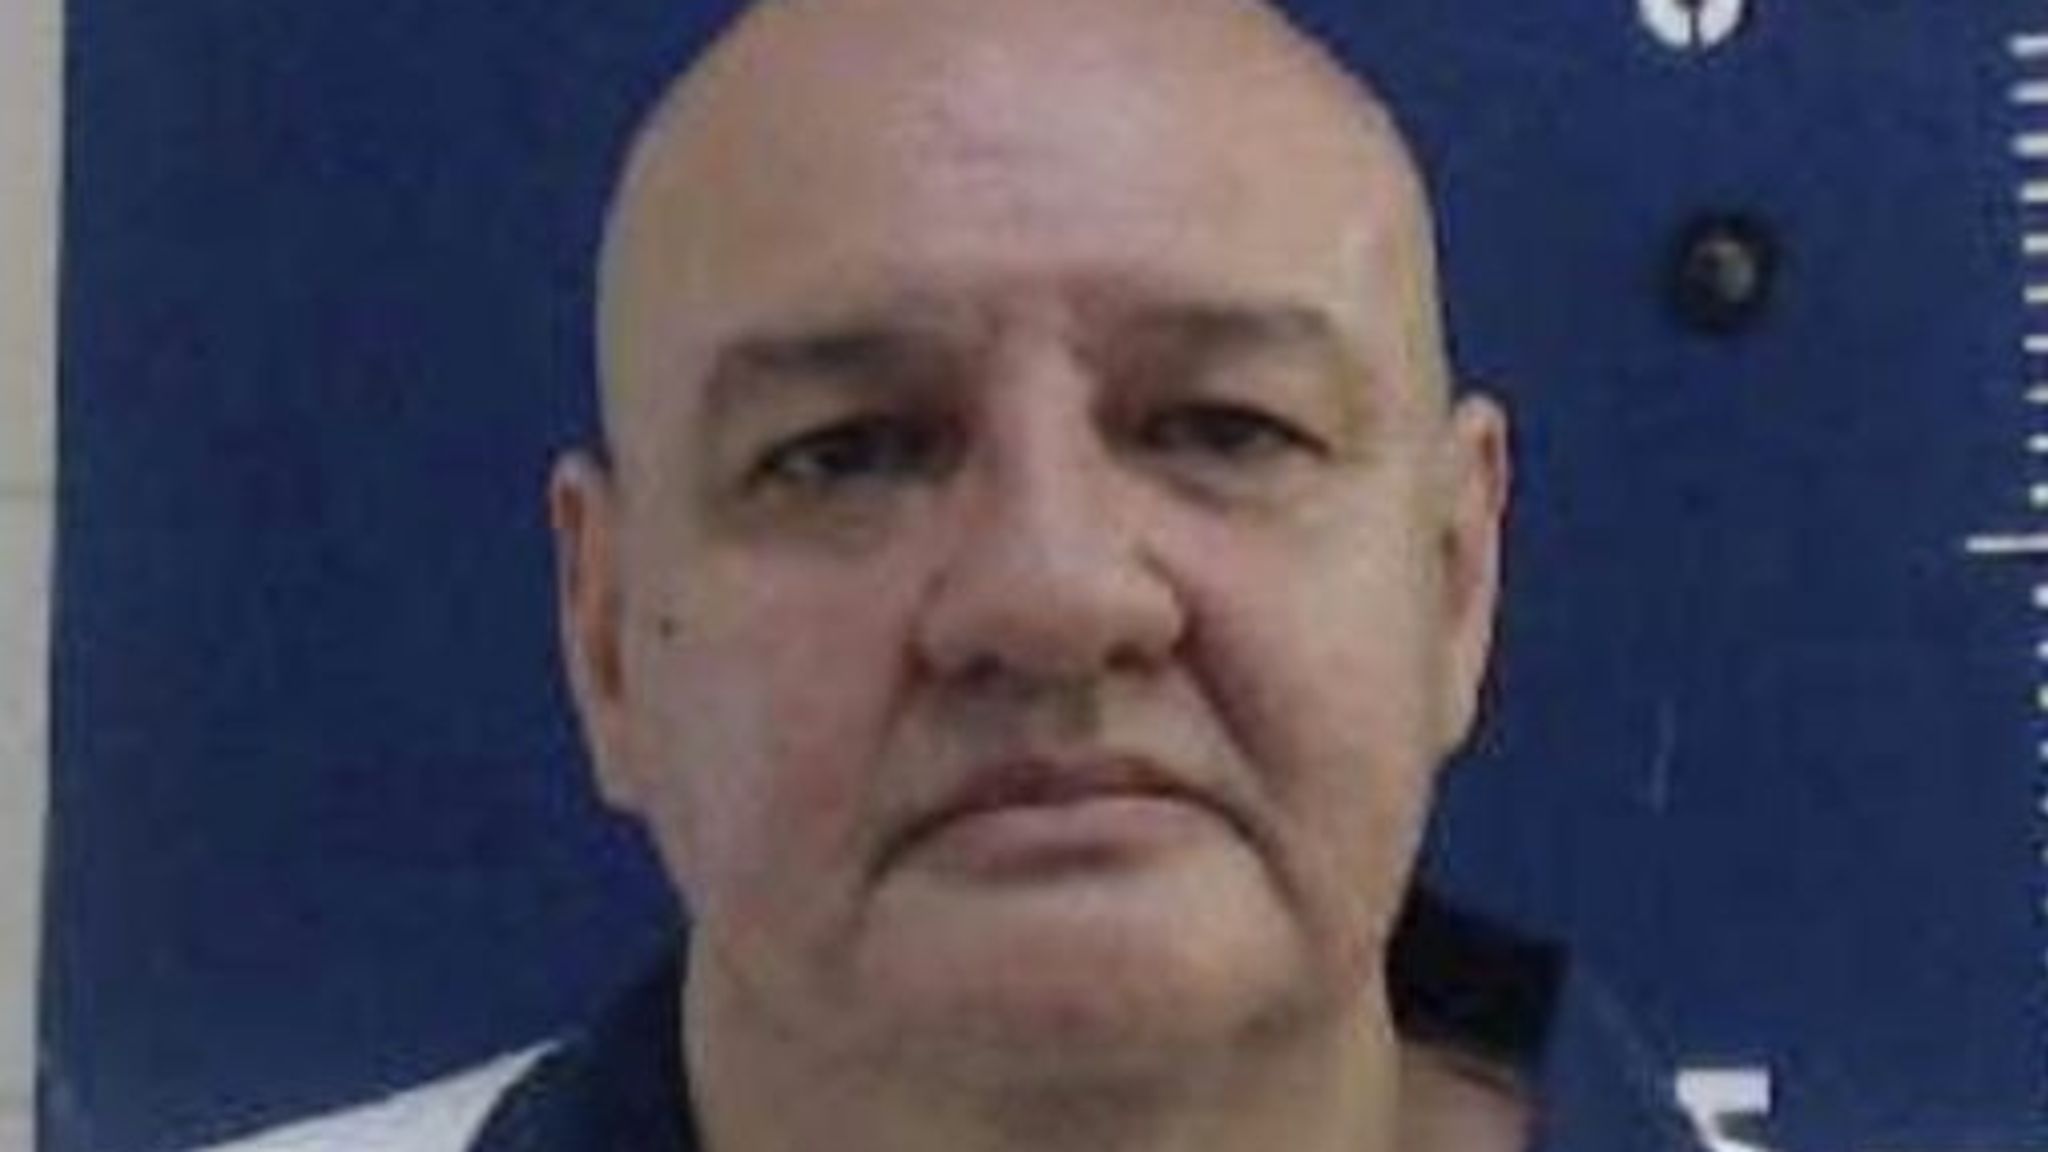 Georgia Death Row Inmate Requests Firing Squad Instead Of ‘Painful’ Lethal Injection